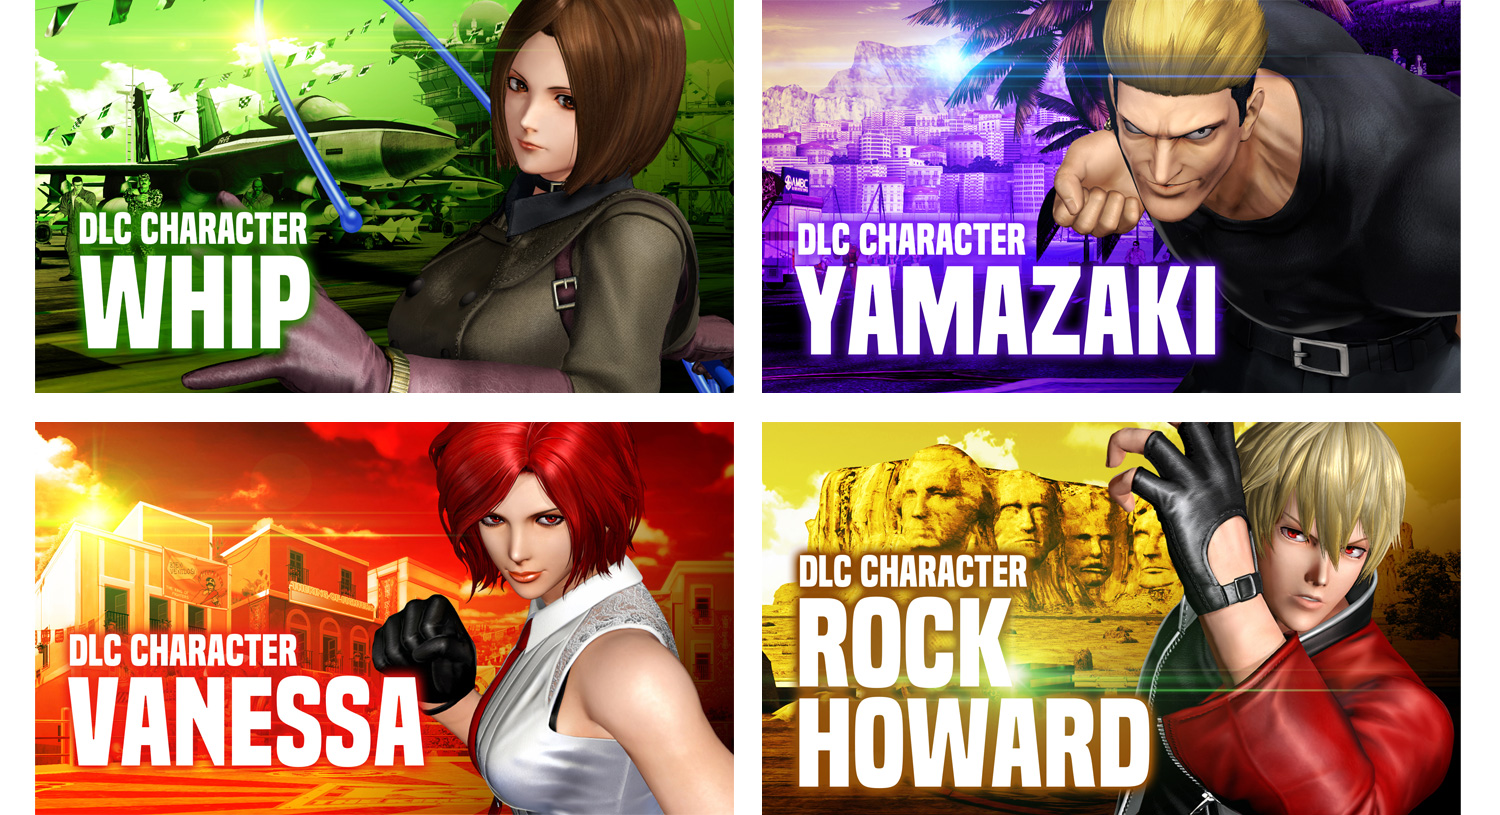 THE KING OF FIGHTERS XIV Official US Website